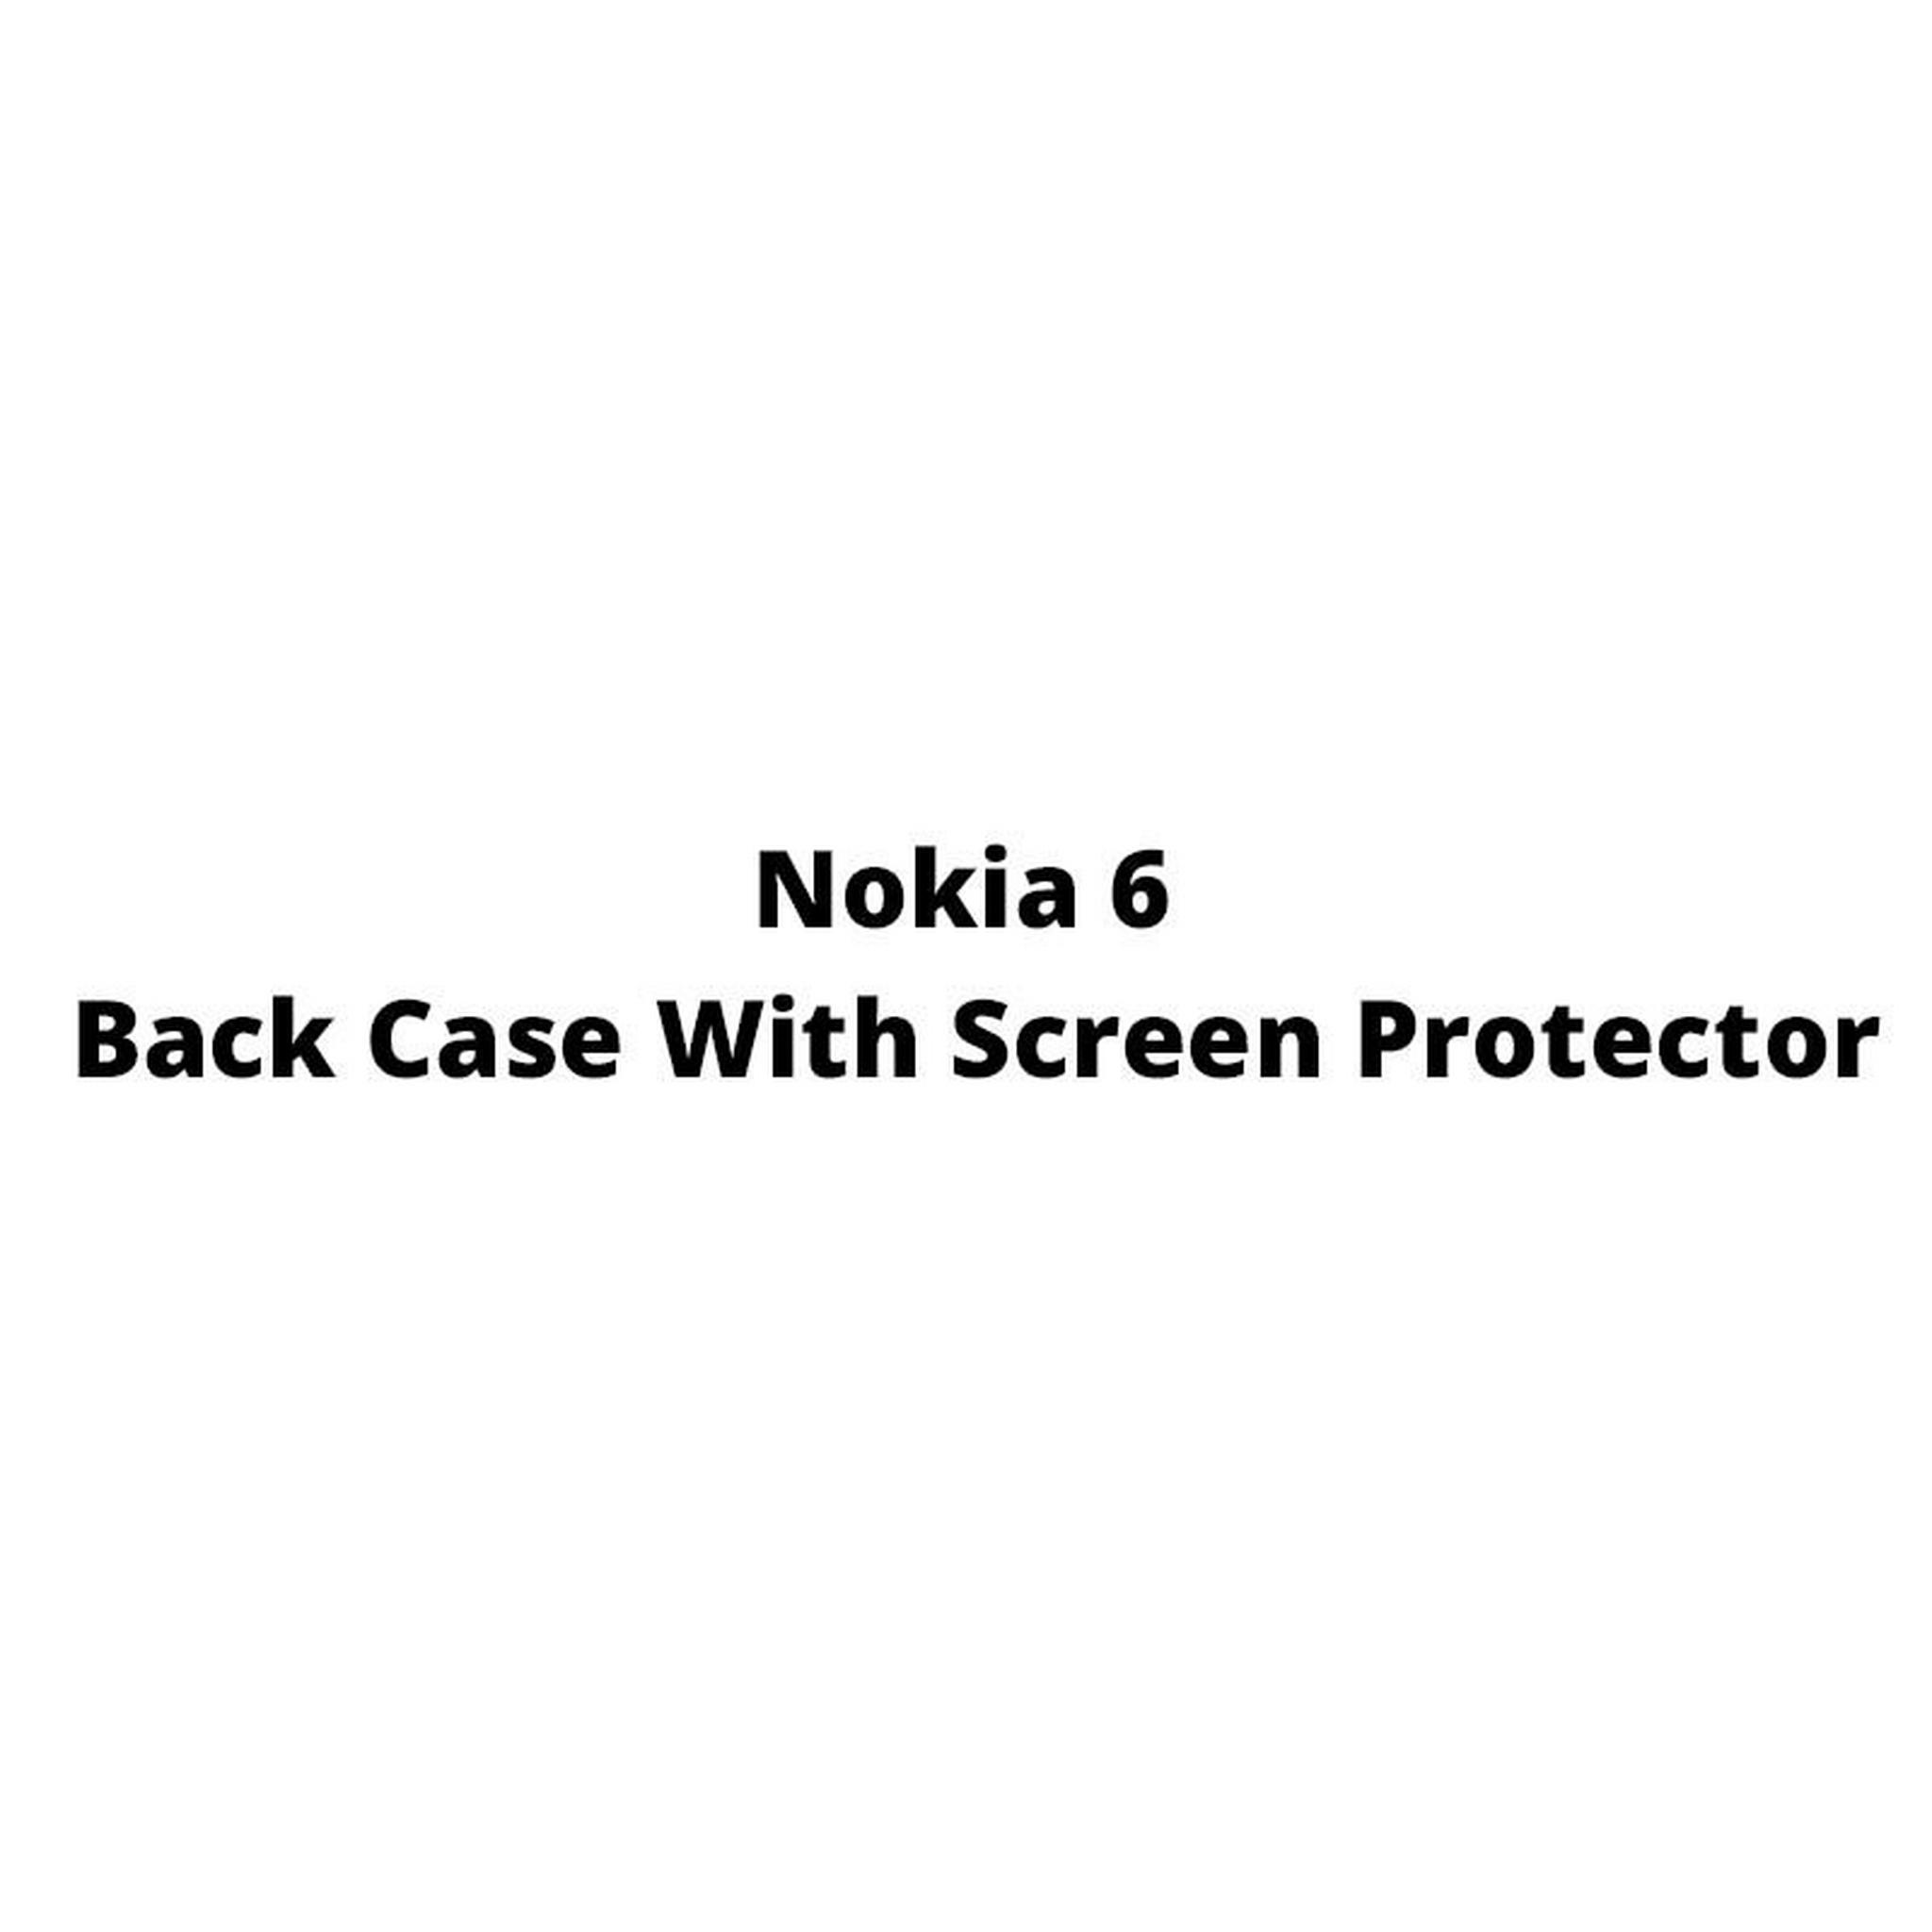 Nokia 6 Back Case With Screen Protector